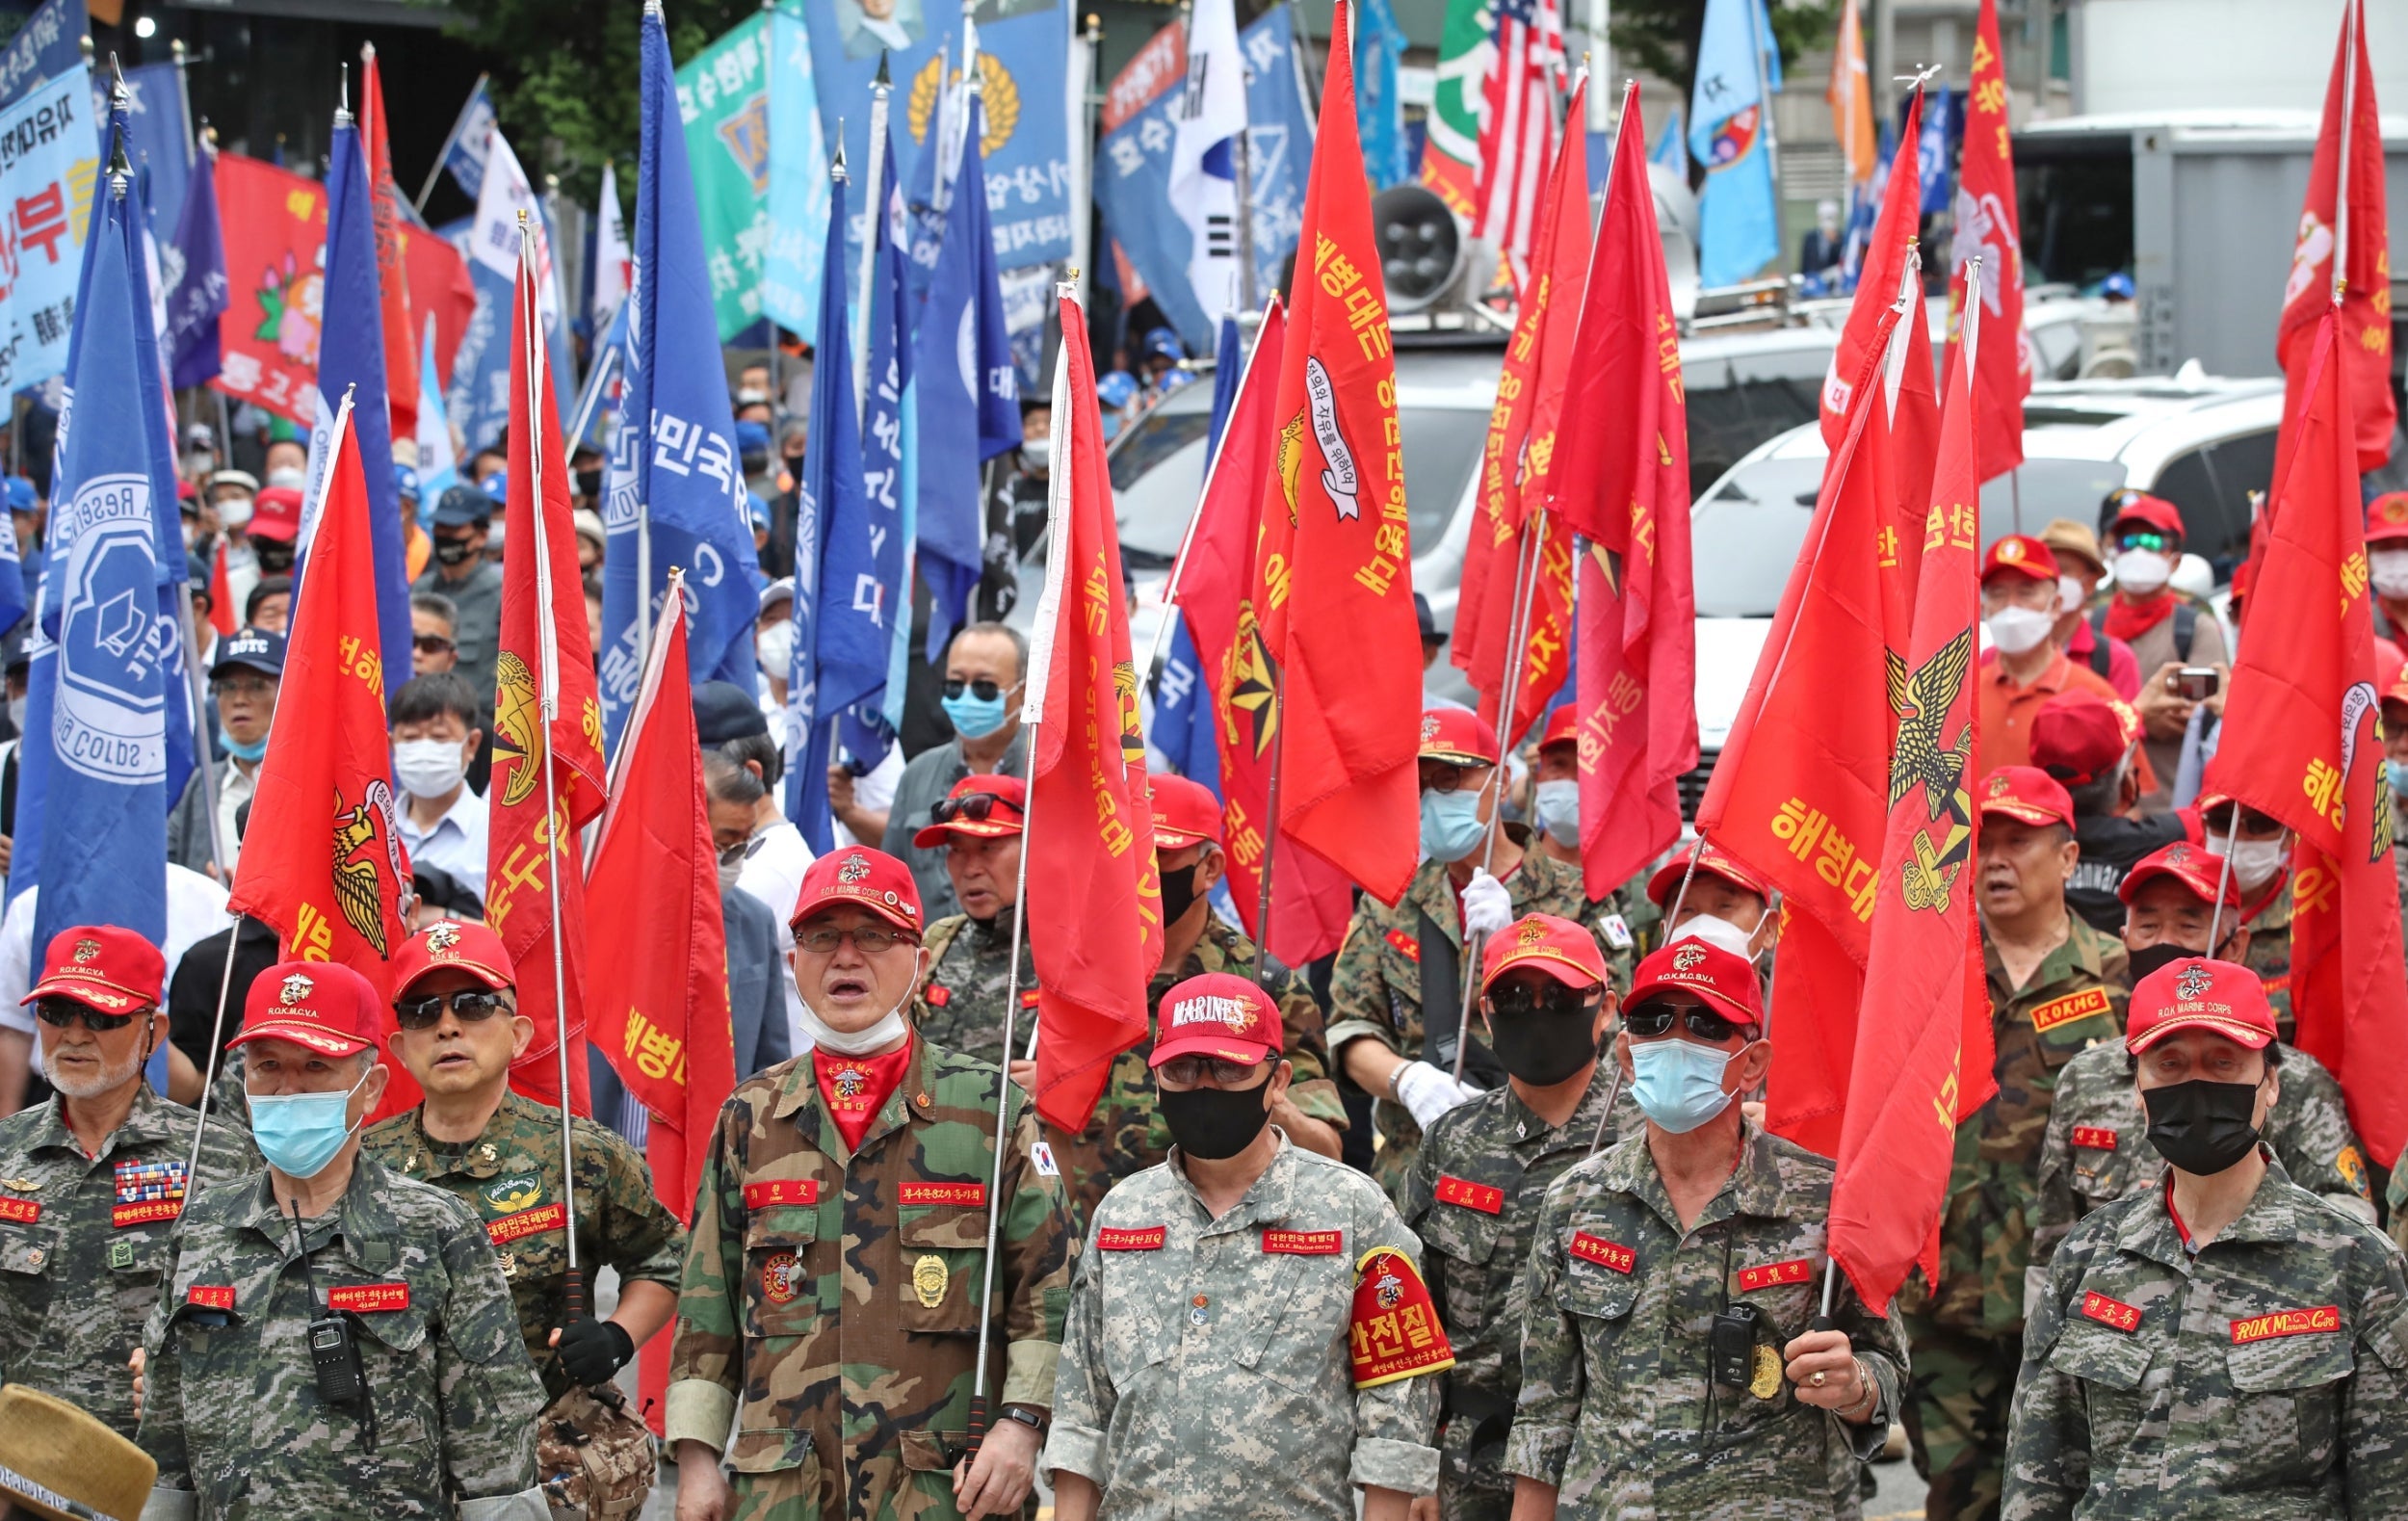 Veterans and conservative activists rally in southern Seoul, South Korea on Thursday to mark the 70th anniversary of the outbreak of the Korean War